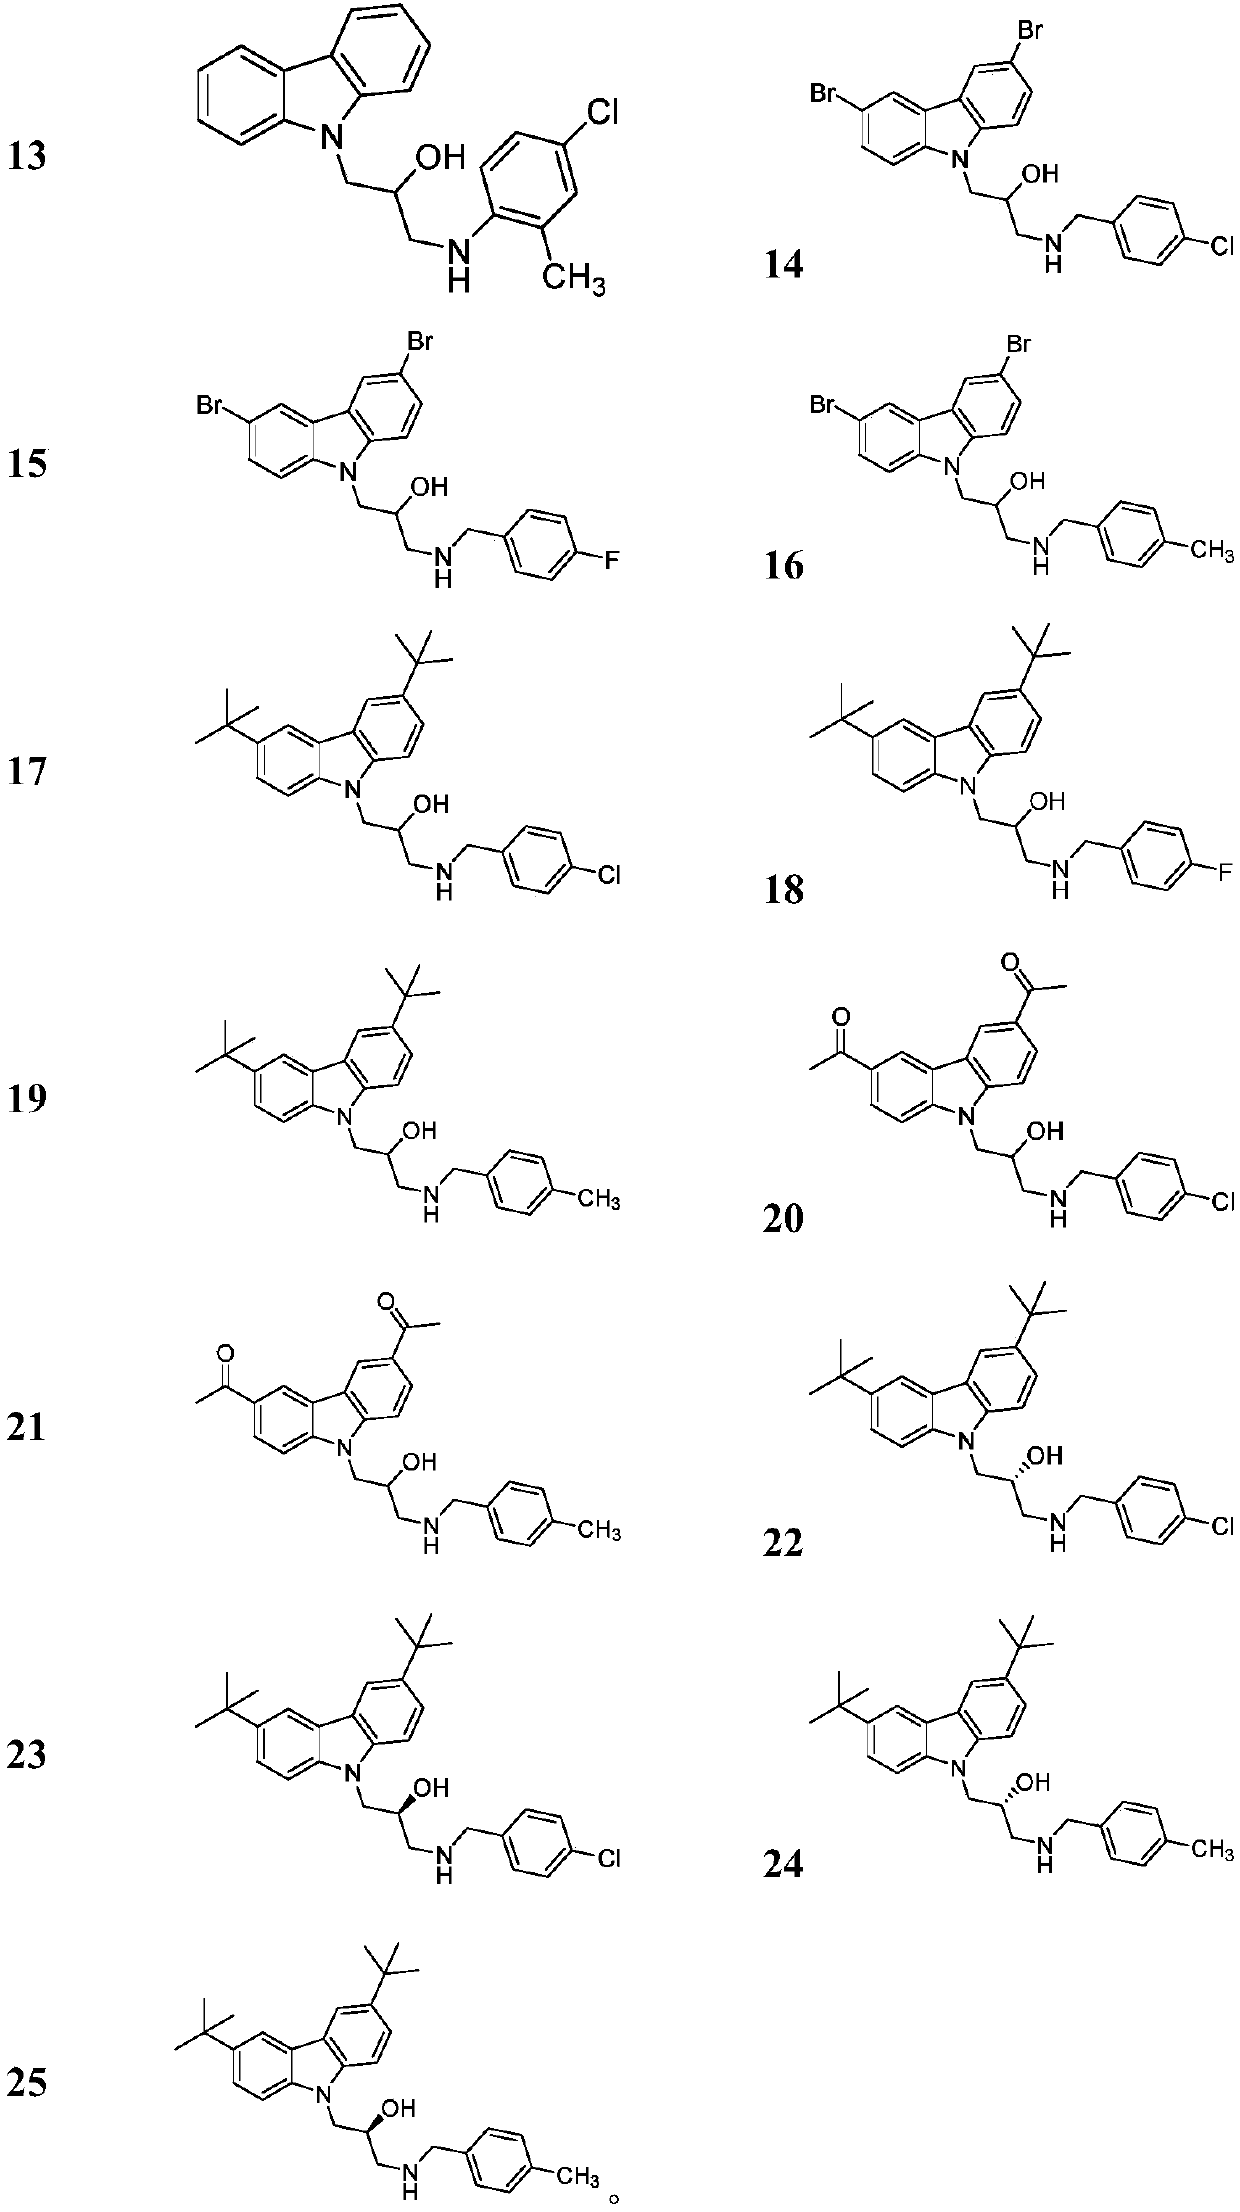 Preparation method for carbazolylv isopropanolamine derivative with chiral center and application